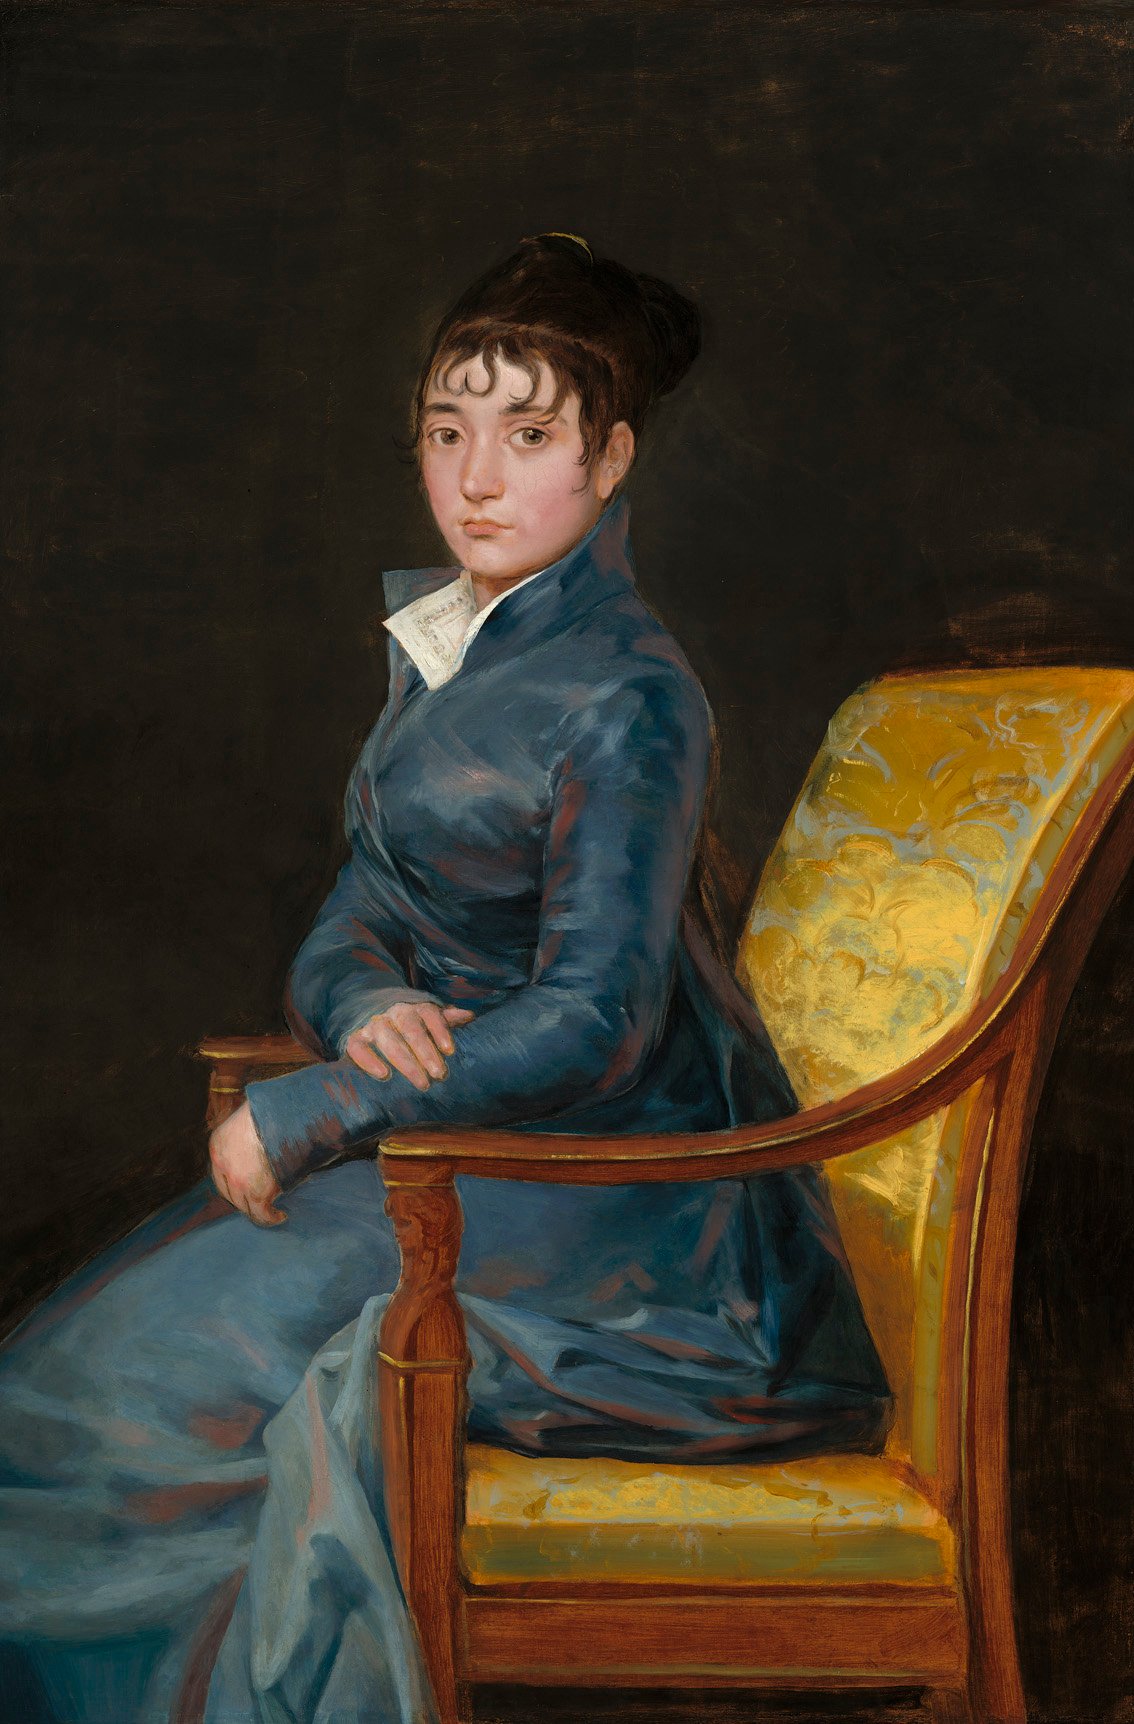 Teresa Luisa de Sureda, h. 1803-1804, oil on canvas, Gift of Mr. and Mrs. P.H.B. Frelinghuysen in memory of her father and mother, Mr. and Mrs. H.O. Havemeyer.